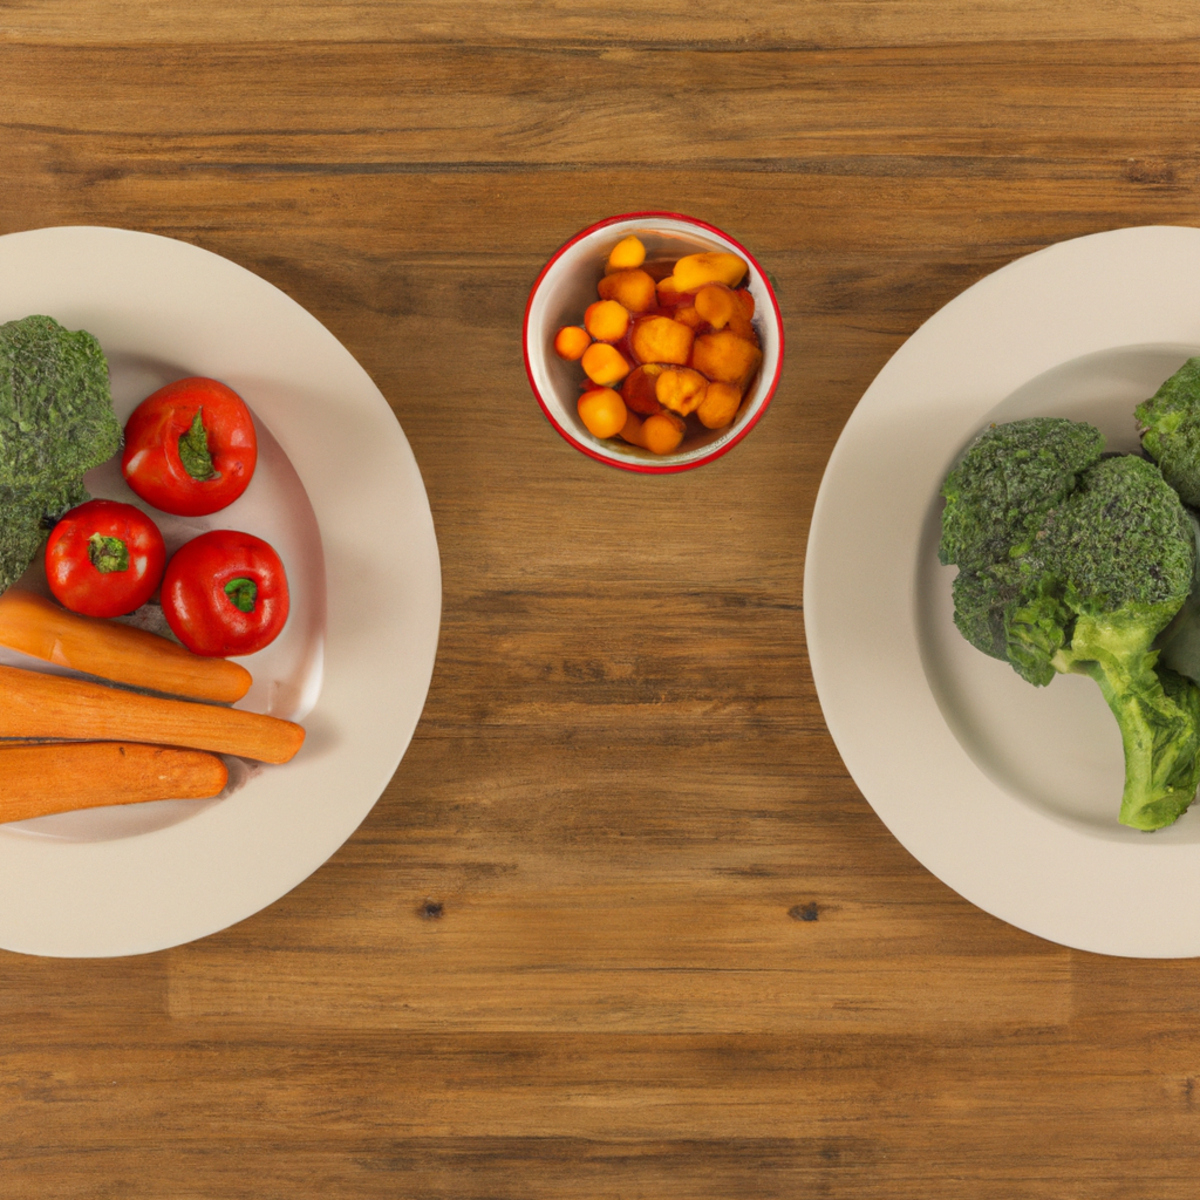 The photo shows a wooden table with two plates of food placed side by side. On the left plate, there are fresh vegetables like broccoli, carrots, and tomatoes, along with a bowl of mixed fruits. On the right plate, there are similar-looking vegetables and fruits, but they appear to be less vibrant and have a slightly duller color. The background of the photo is blurred, but it seems to be a grocery store or a farmer's market. The photo captures the essence of the article, highlighting the differences between organic and conventional foods in terms of their nutritional value.